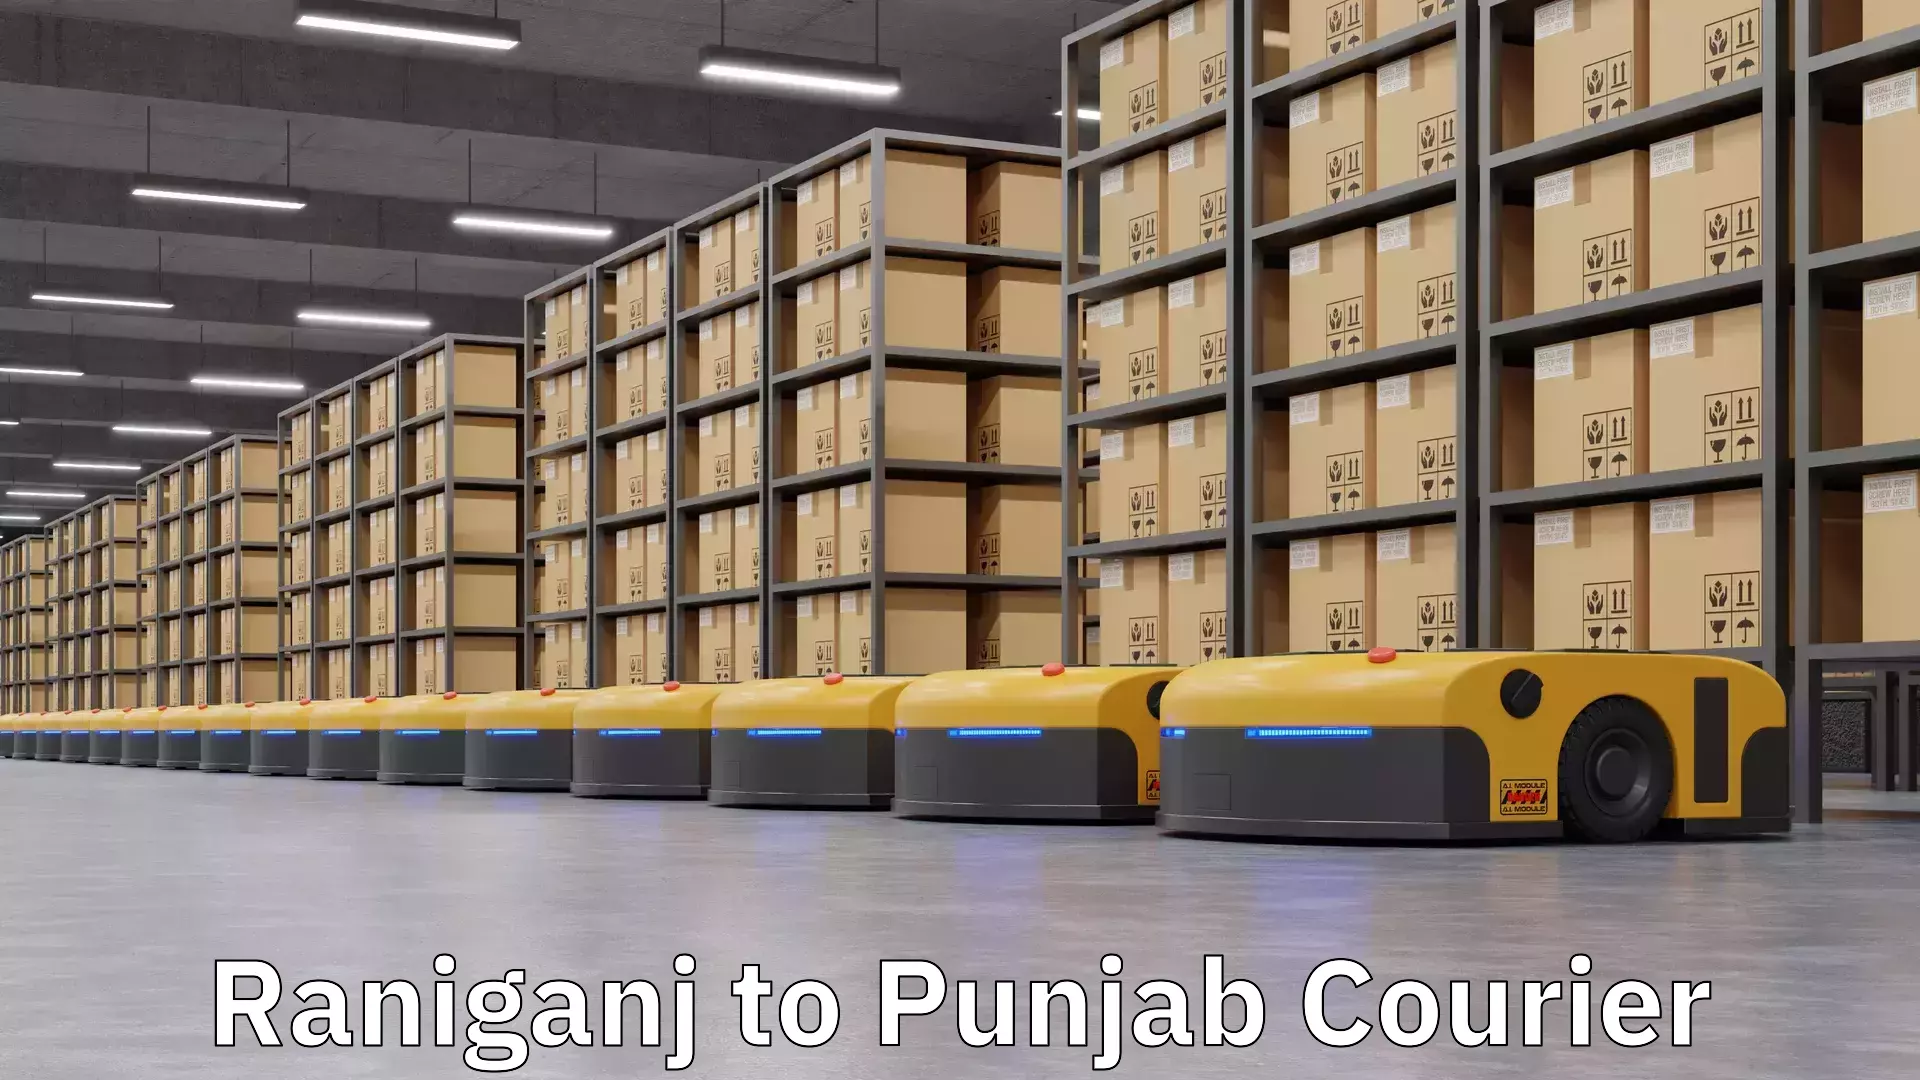 Flexible delivery schedules Raniganj to Punjab